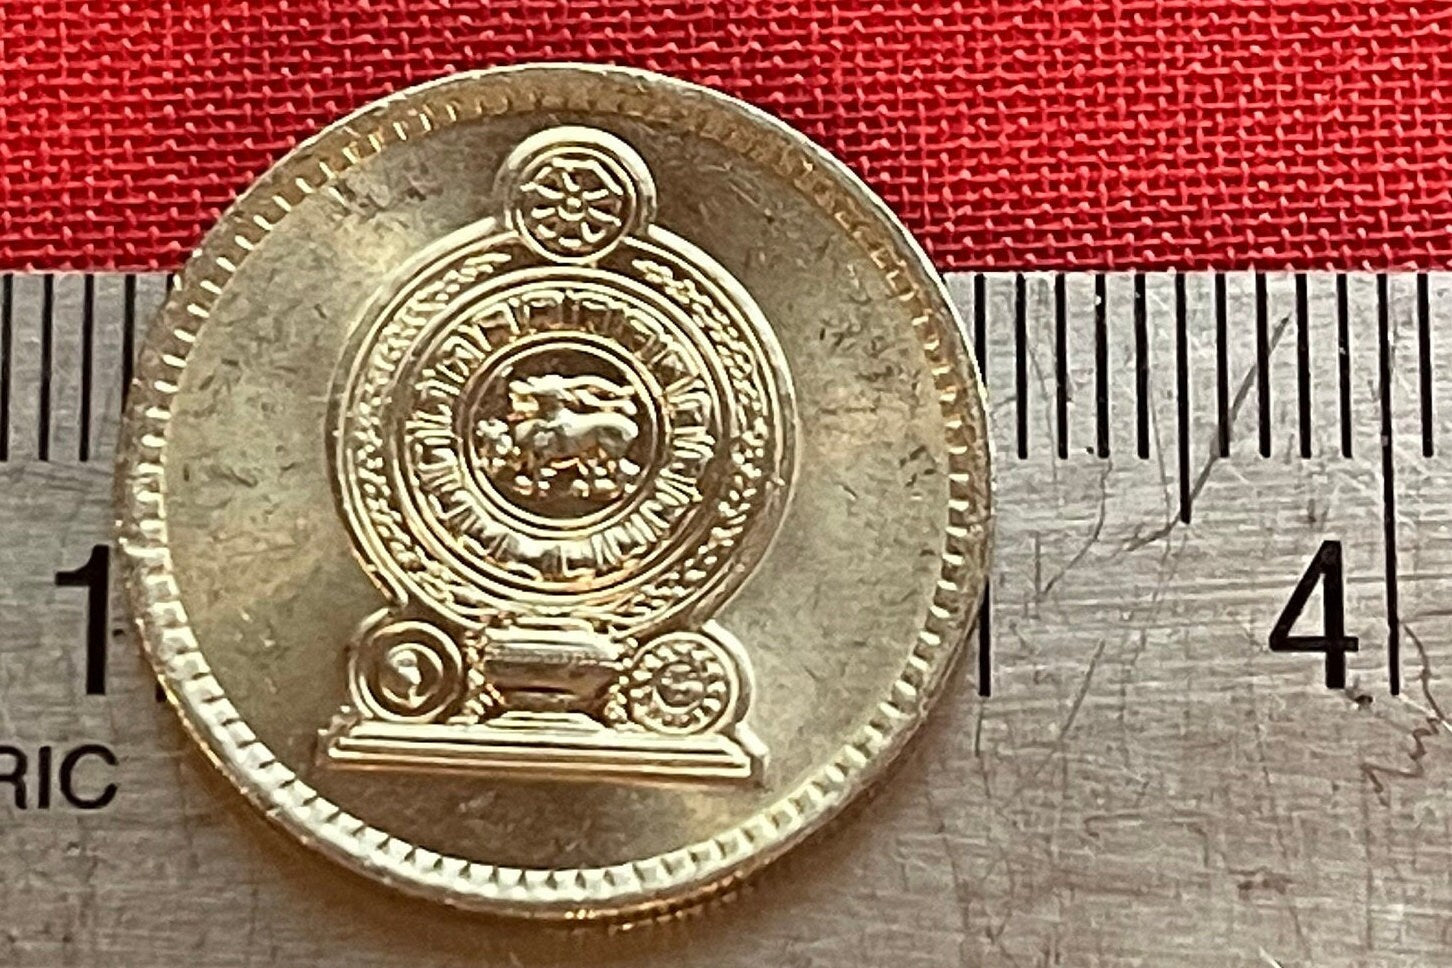 Wheel of Dharma 50 Cents & Lion with Sword Sri Lanka Authentic Coin Money for Jewelry and Craft Making (Dharmachakra) (Dhammacakka)